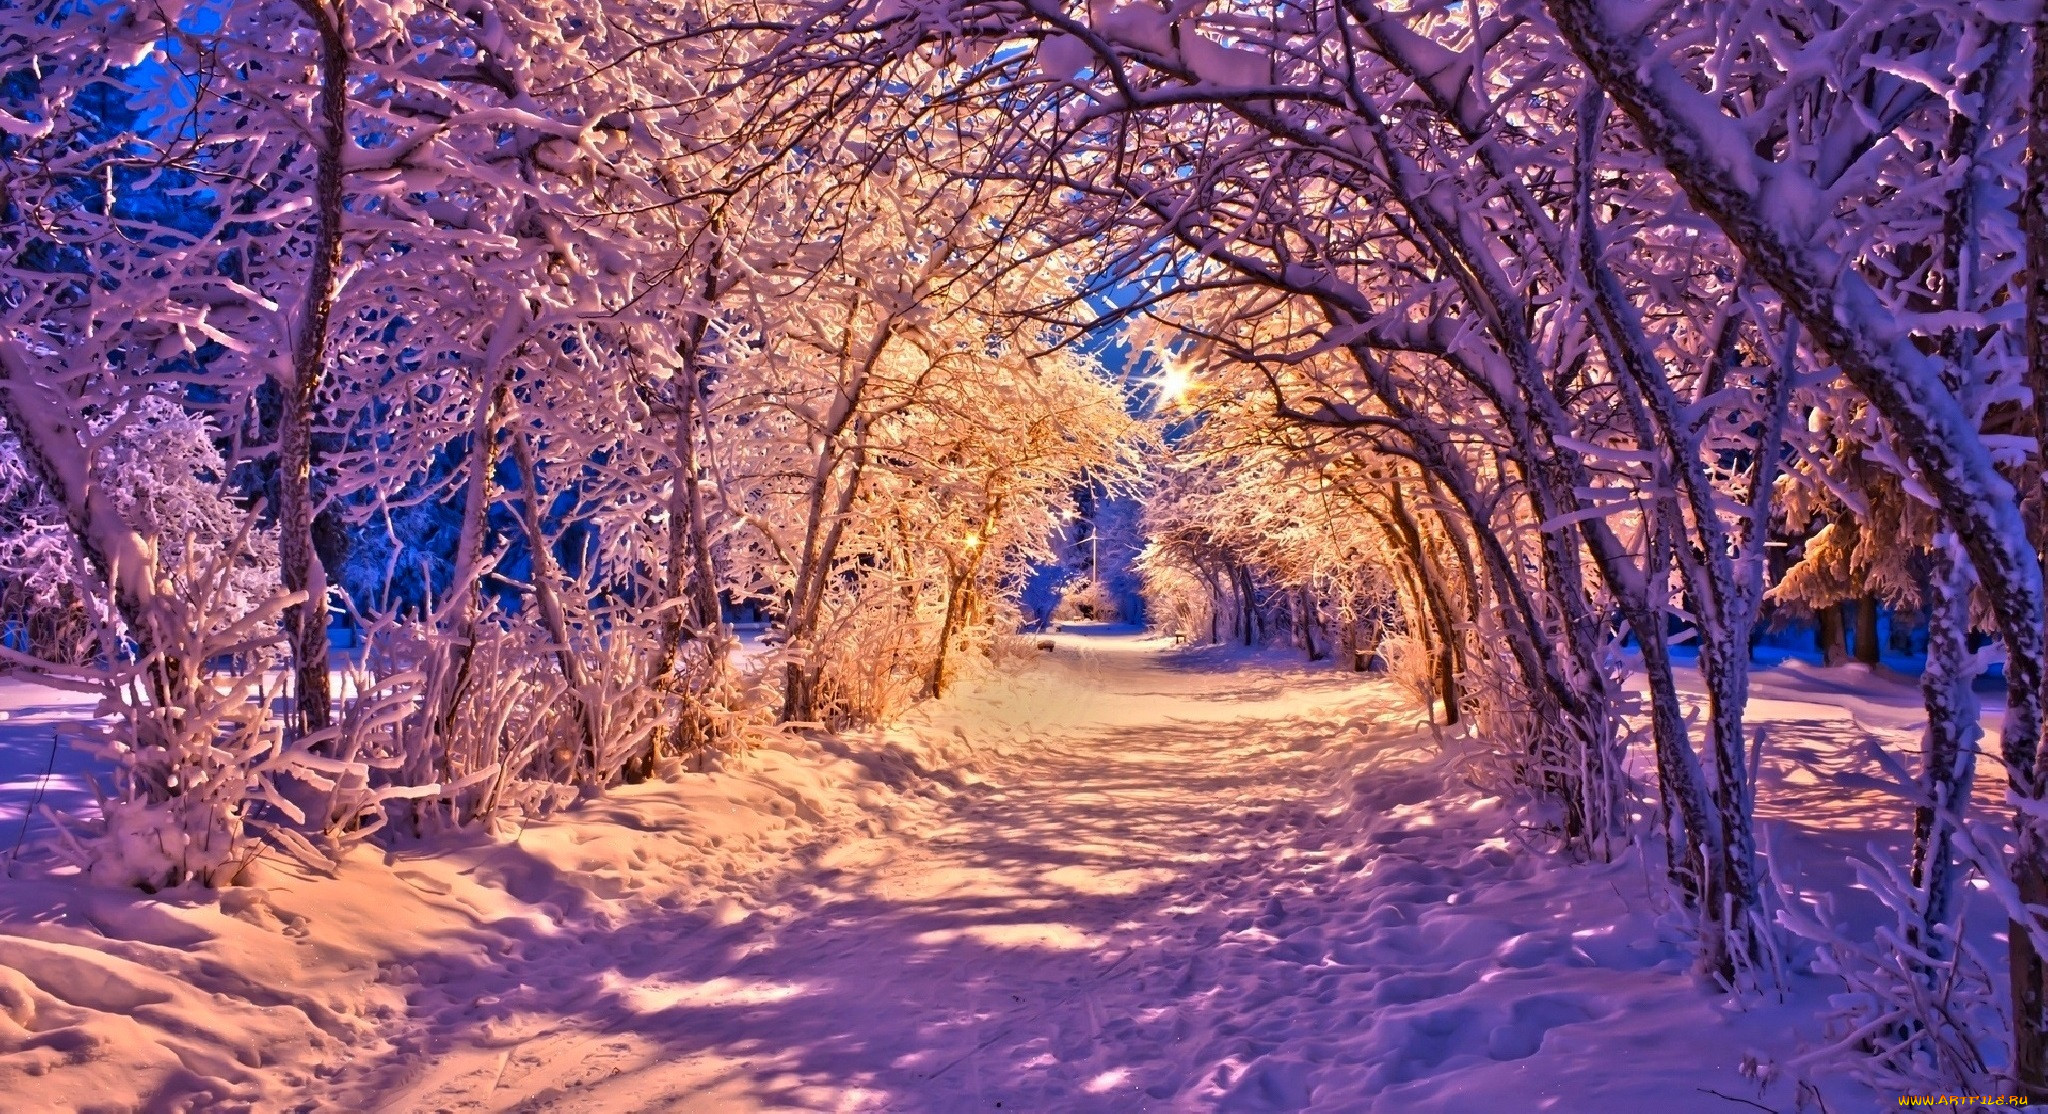 , , , , , , , , , beautiful, white, winter, nature, , road, forest, , lights, lanterns, park, bench, trees, path, sunset, snow, nice, cool